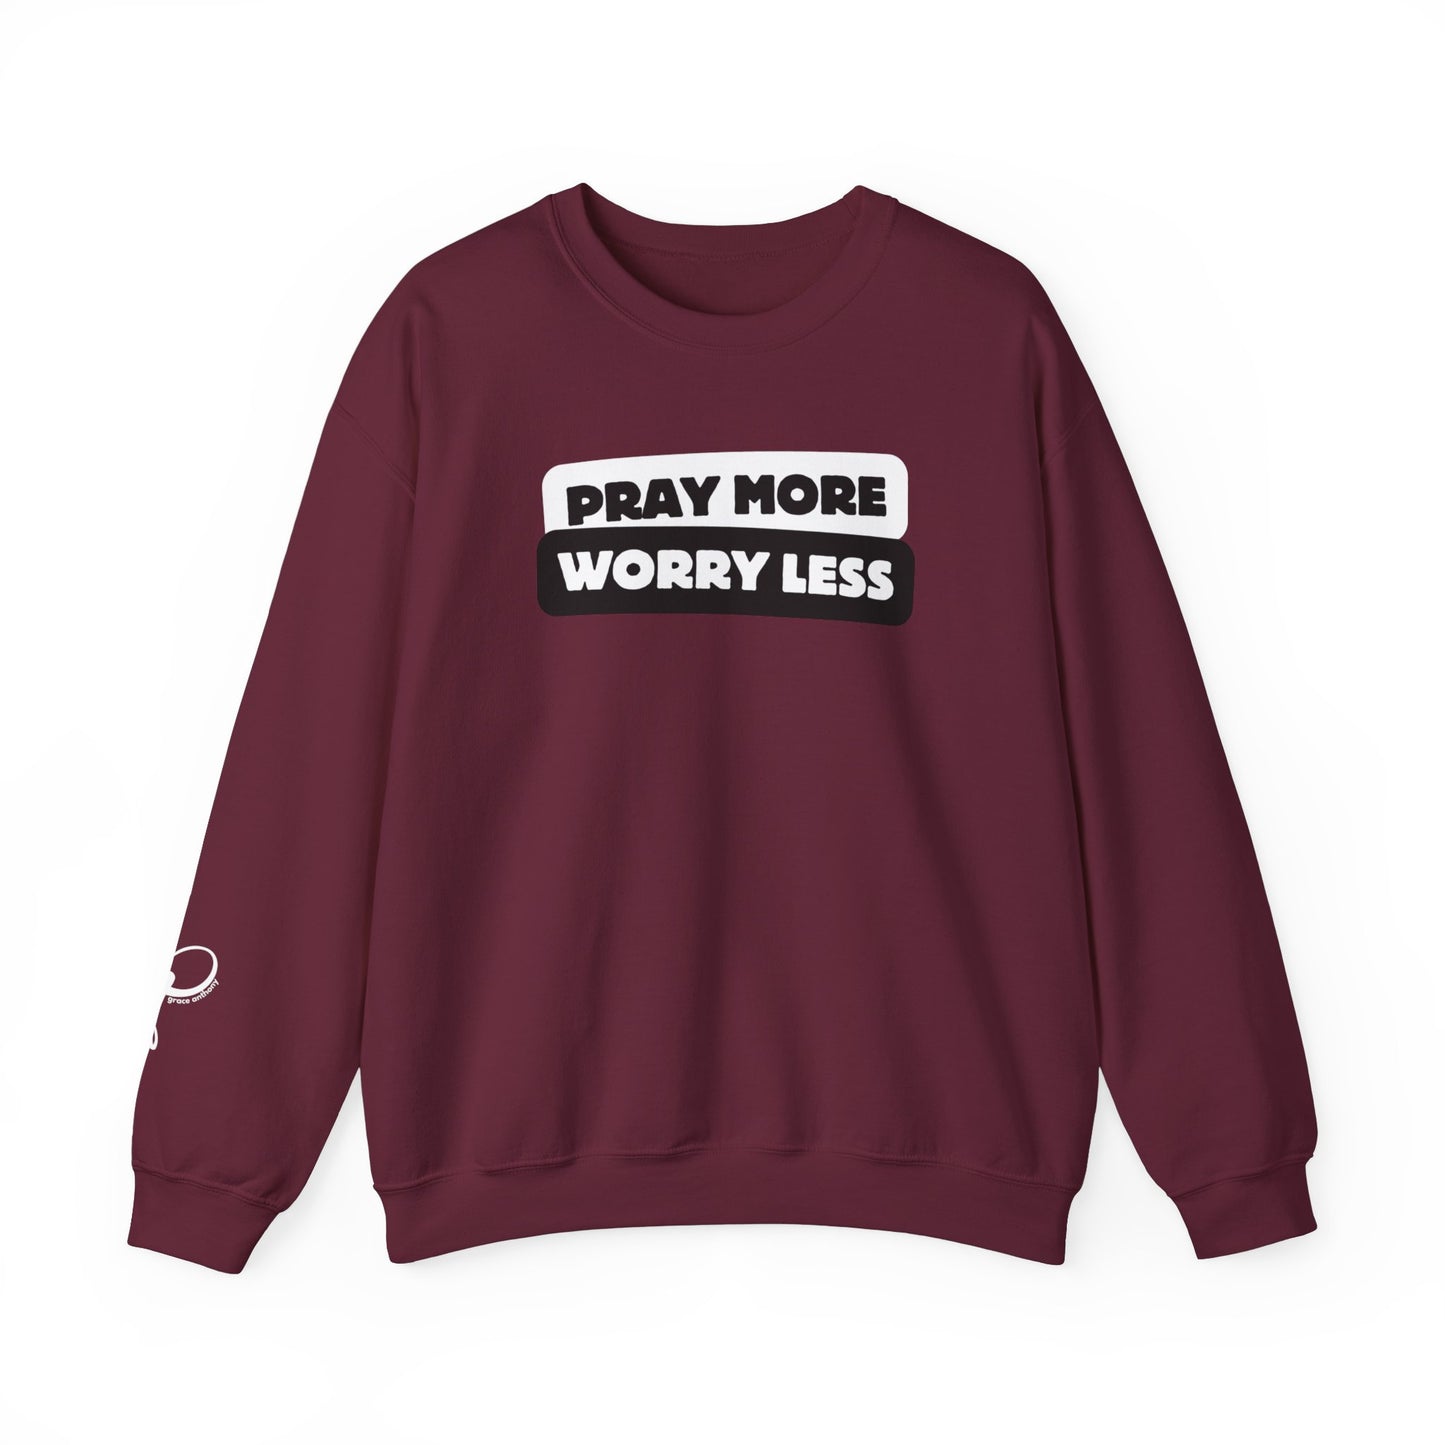 Pray More Worry Less Men Women Sweatshirt Hoodie Christian Bible Quotes Inspiration Motivation Quotes Gift for Her Him Prayer Request